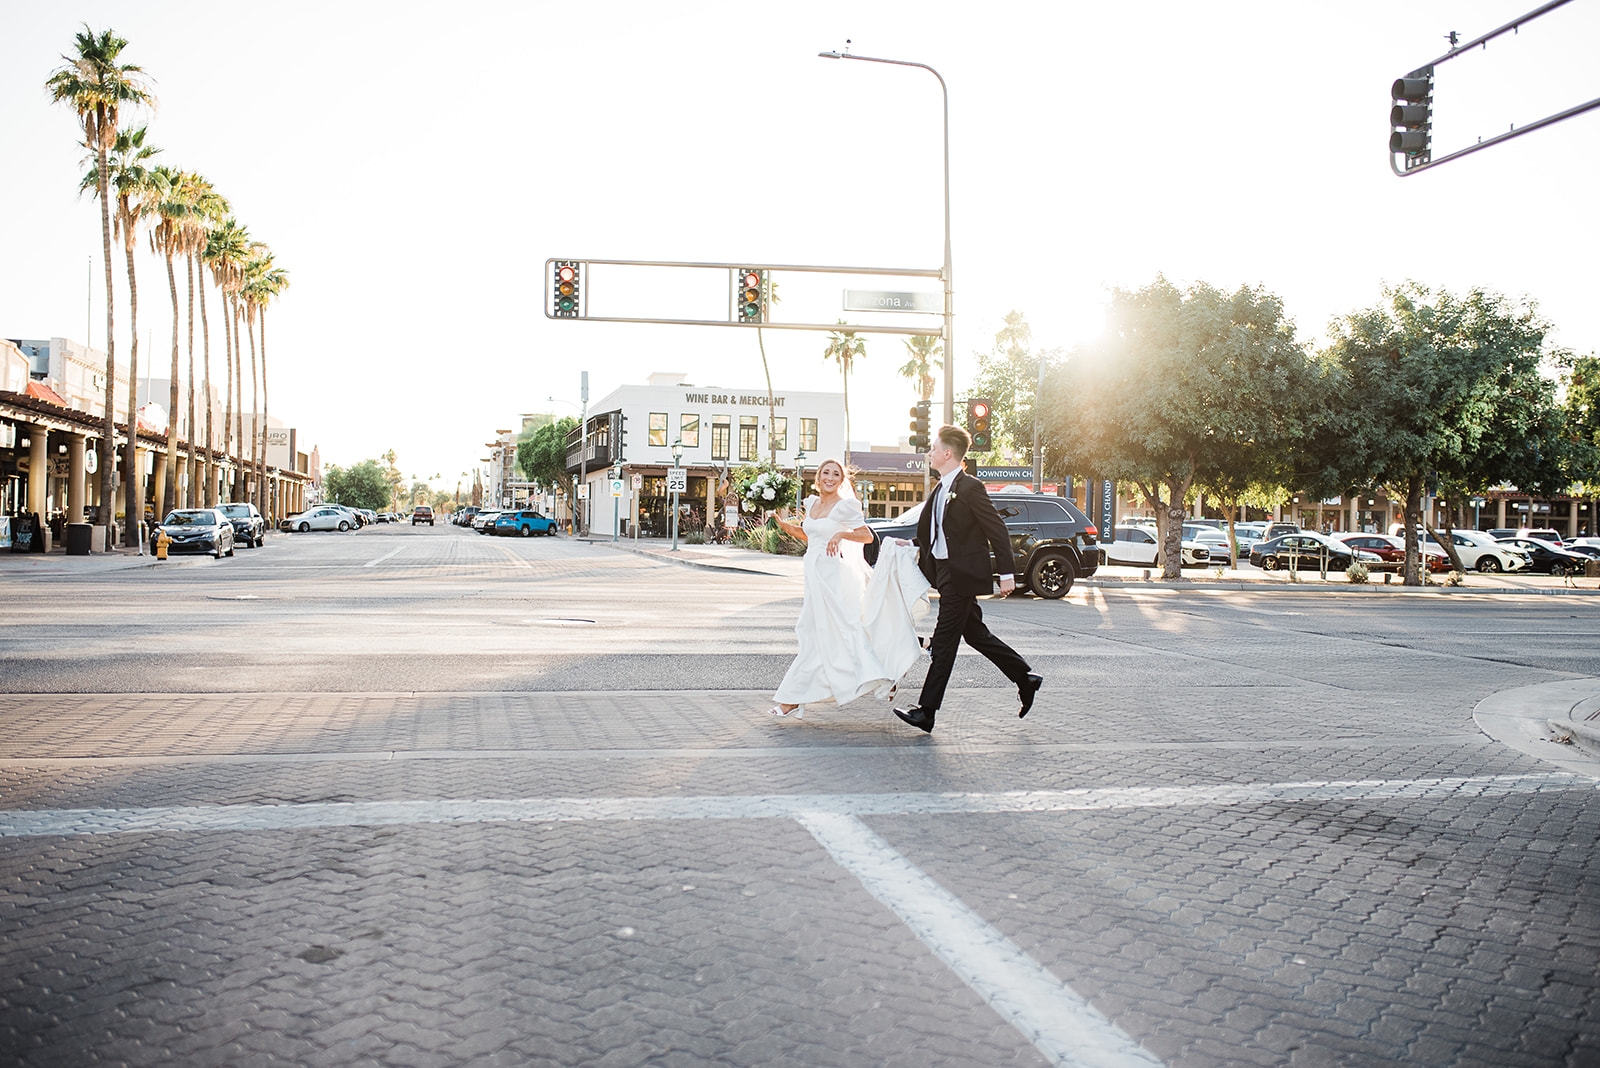 Newlyweds walk across an intersection while the groom holds the train and bride her white flowers